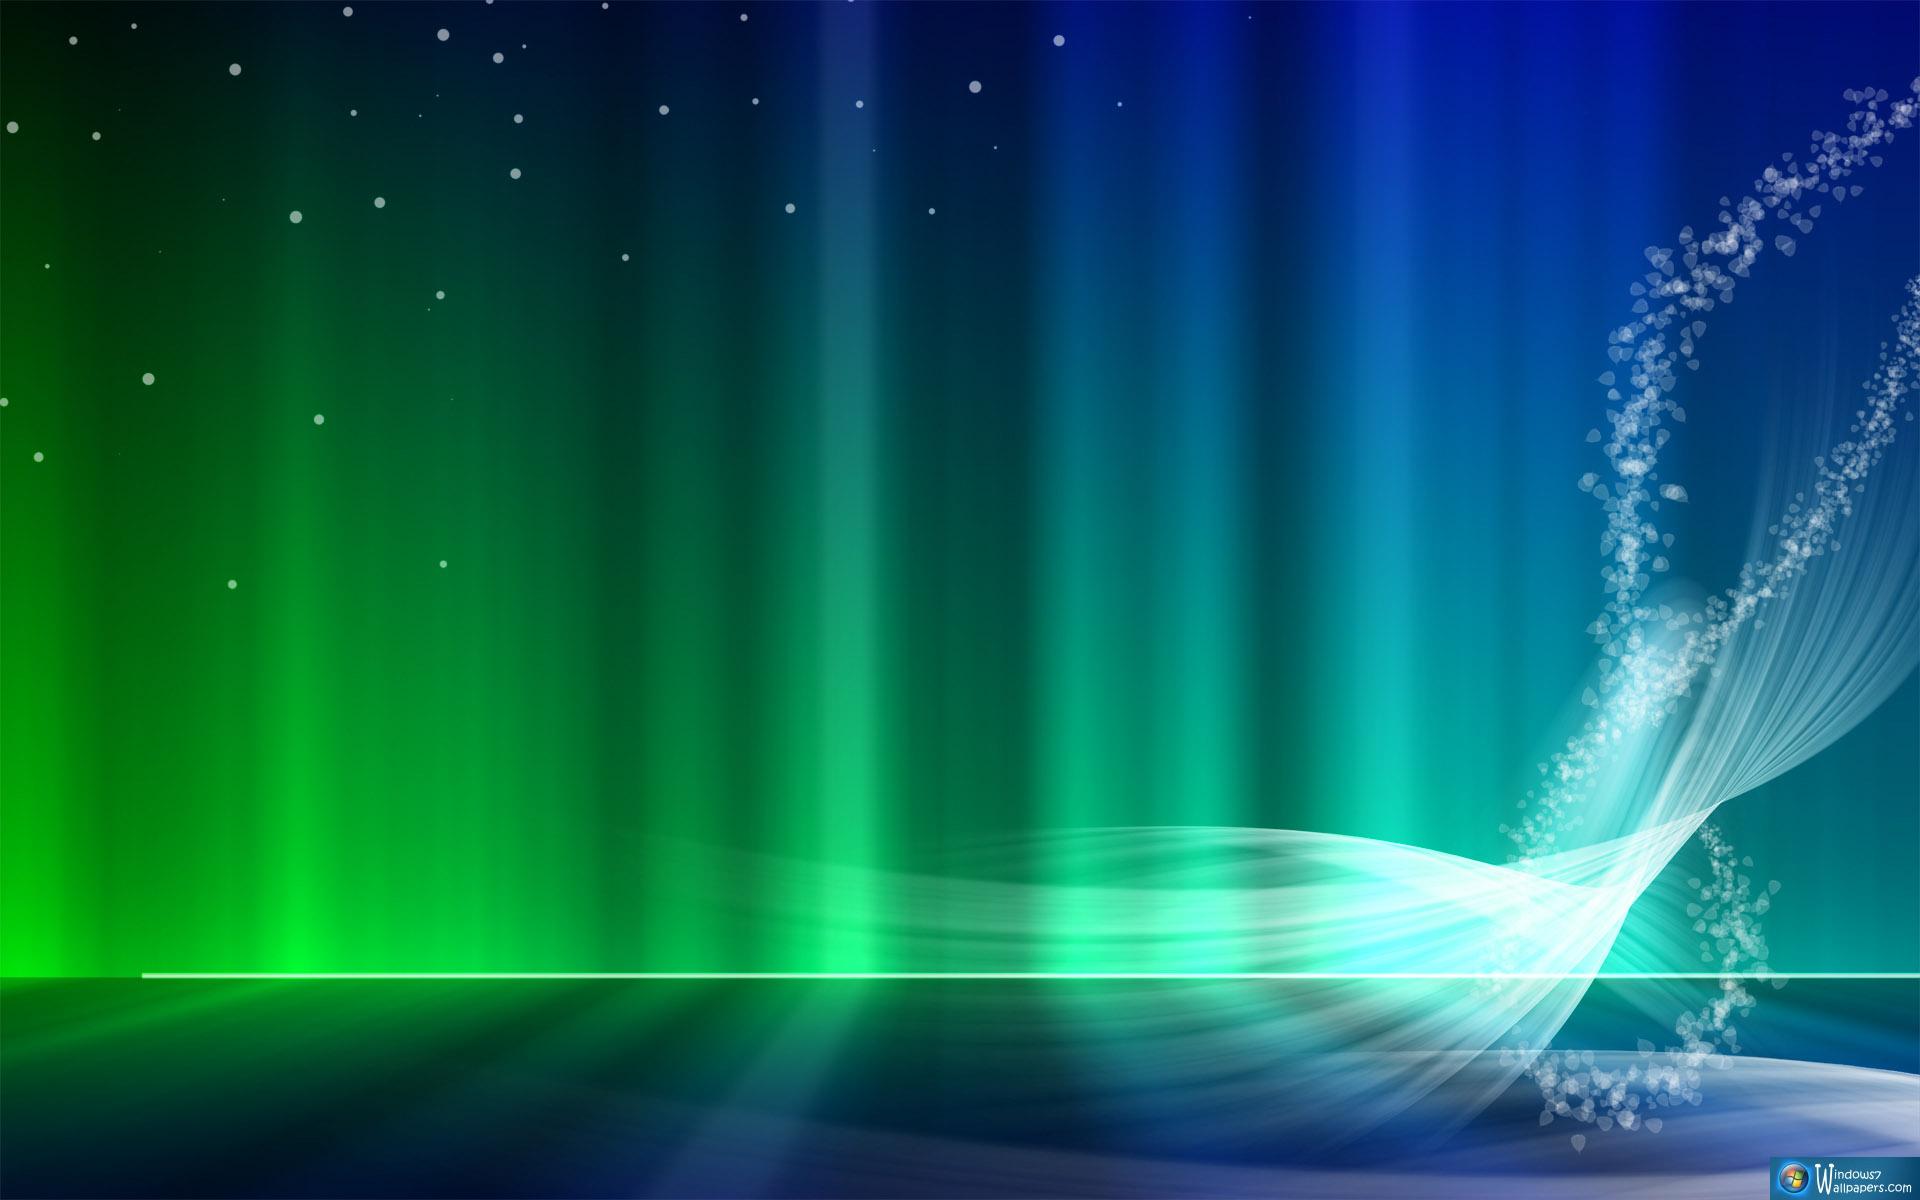 windows 7 hd live wallpaper With Resolutions 19201200 Pixel